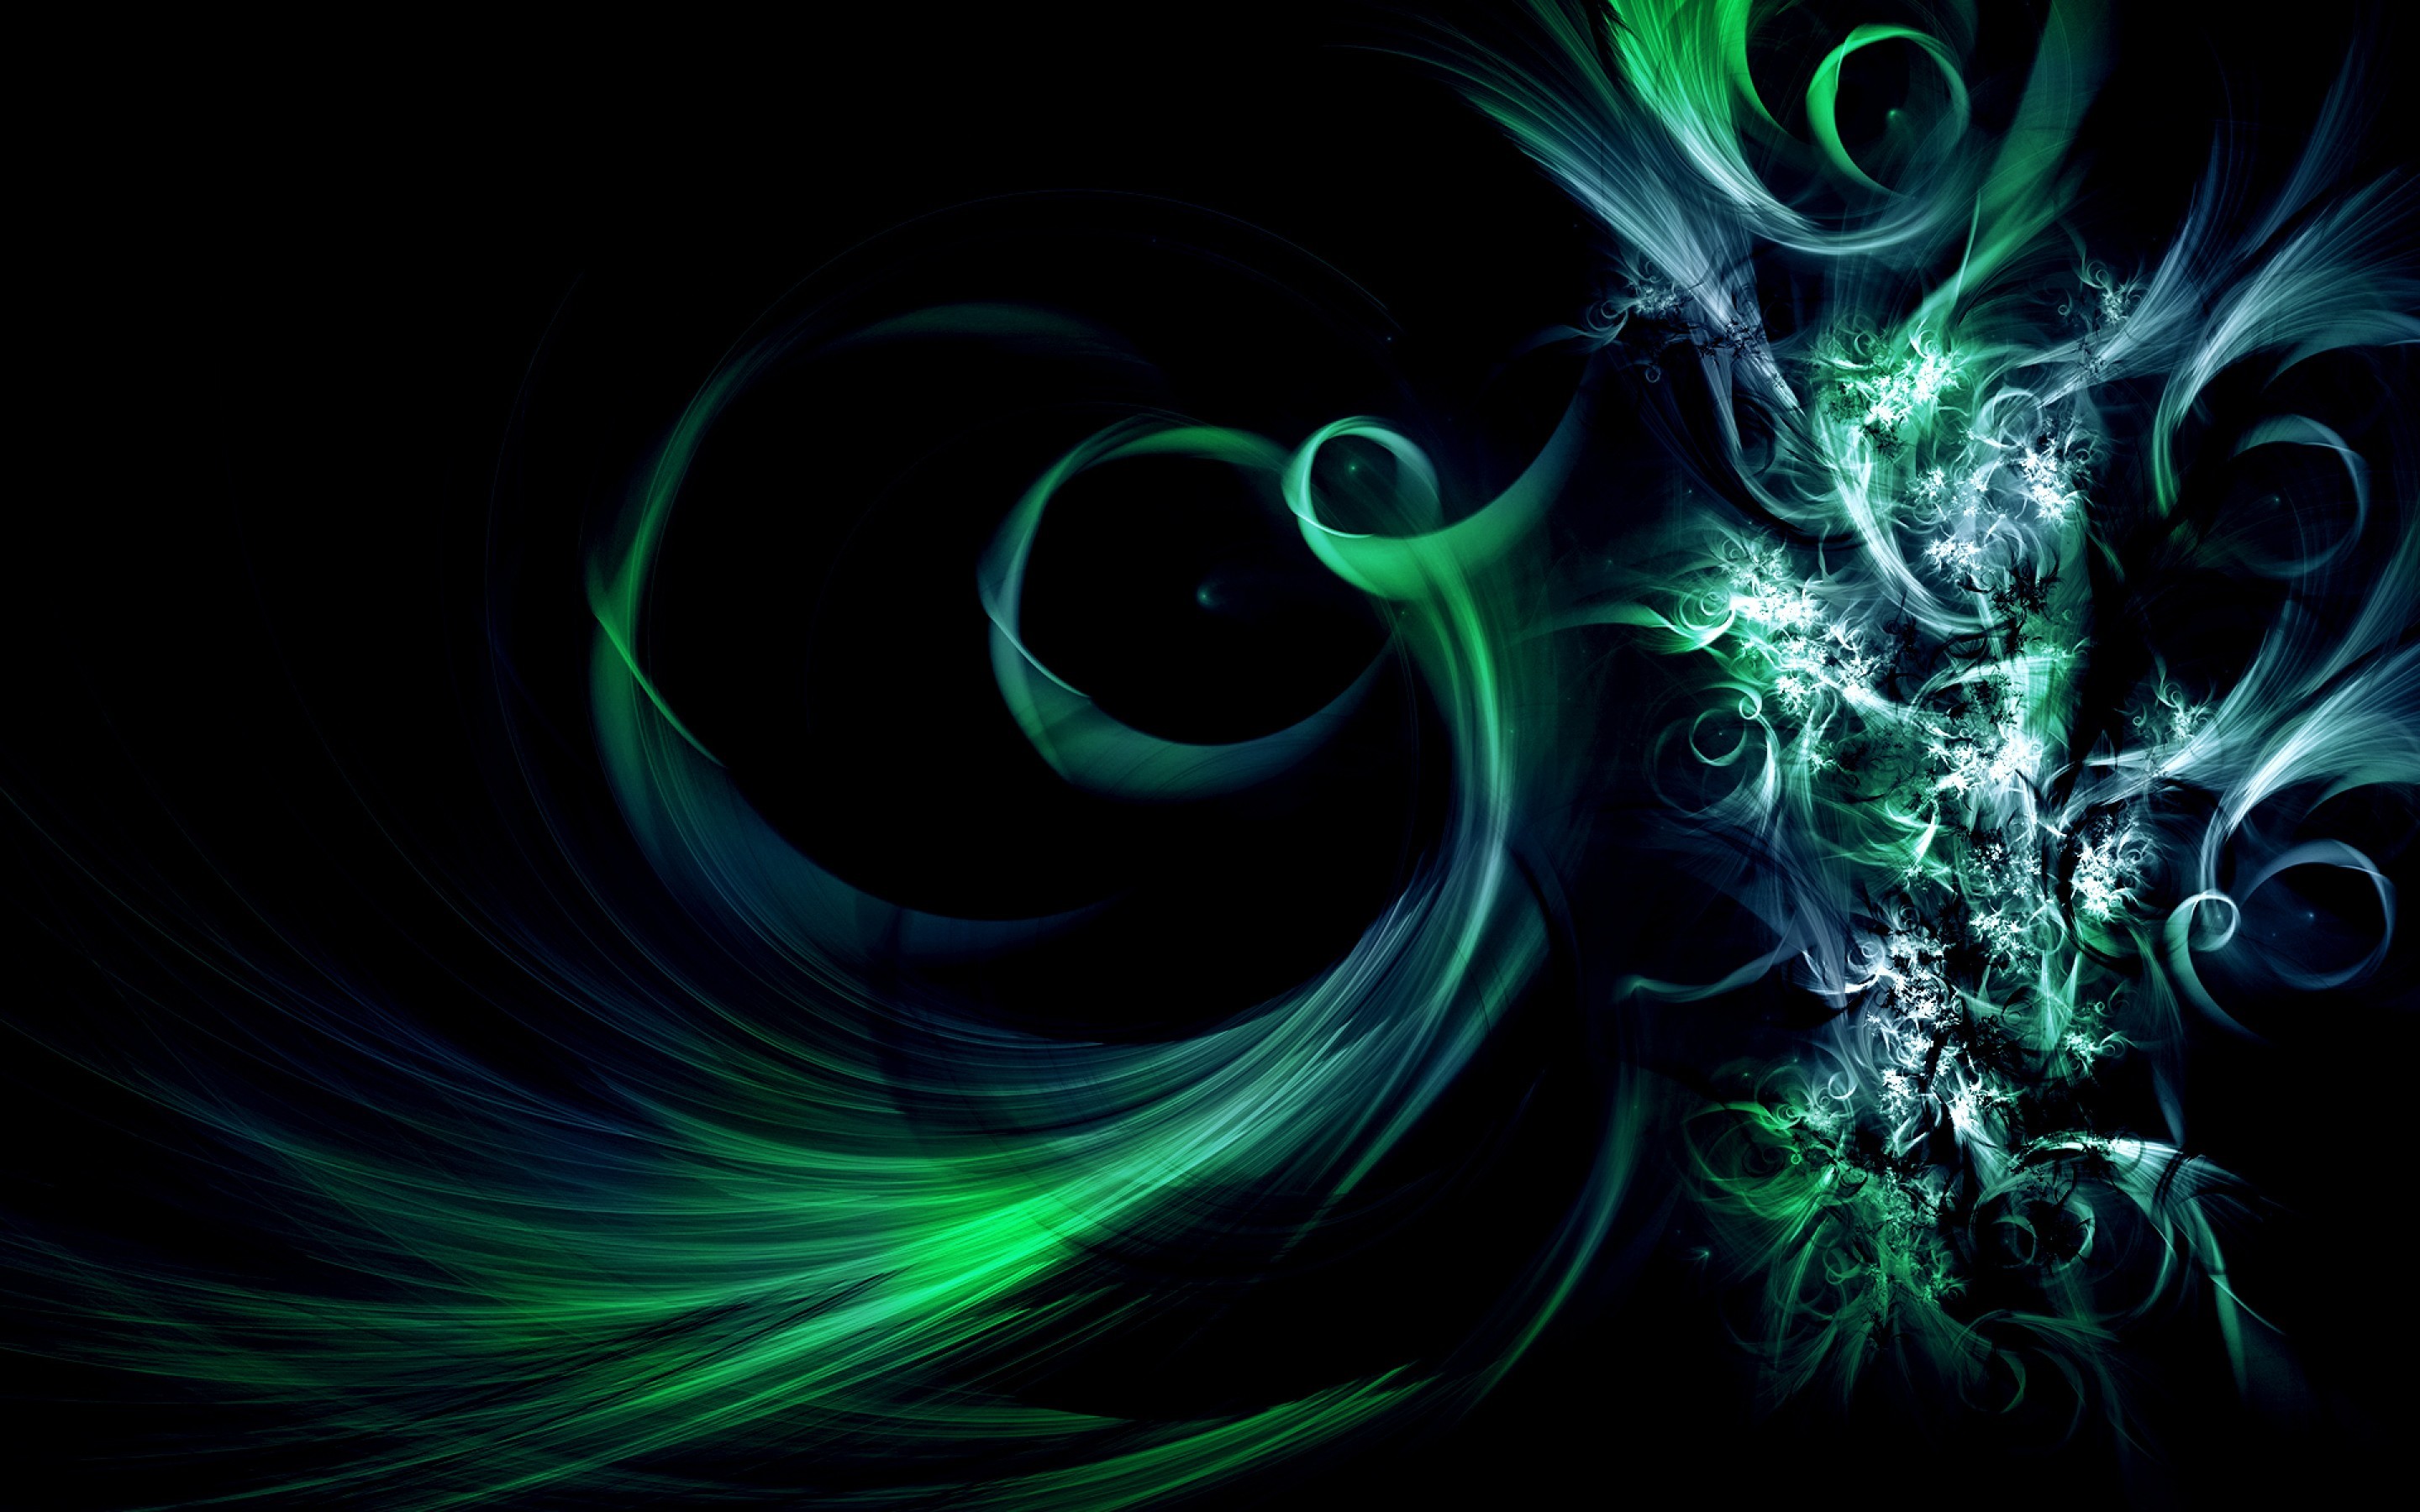 Green Fire Images  Free Download on Freepik